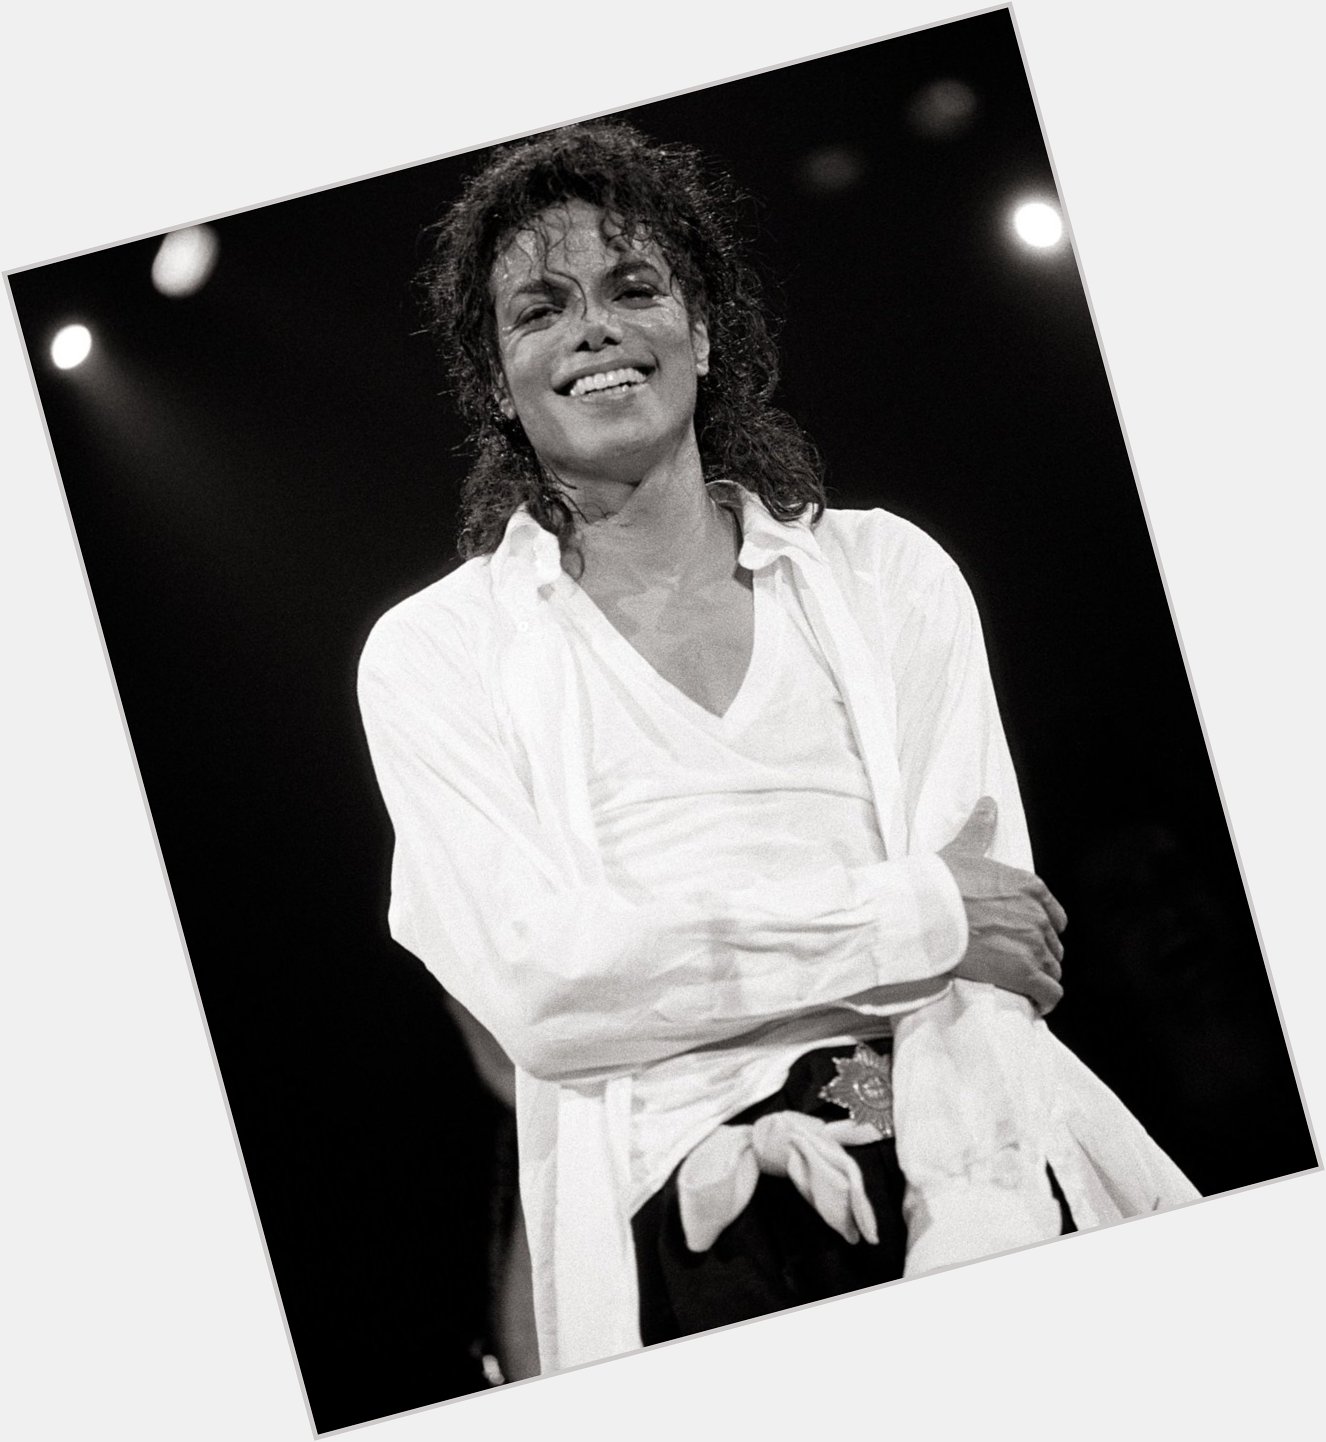 Happy birthday to the LEGENDARY Michael Jackson! He would\ve turned 59 today  